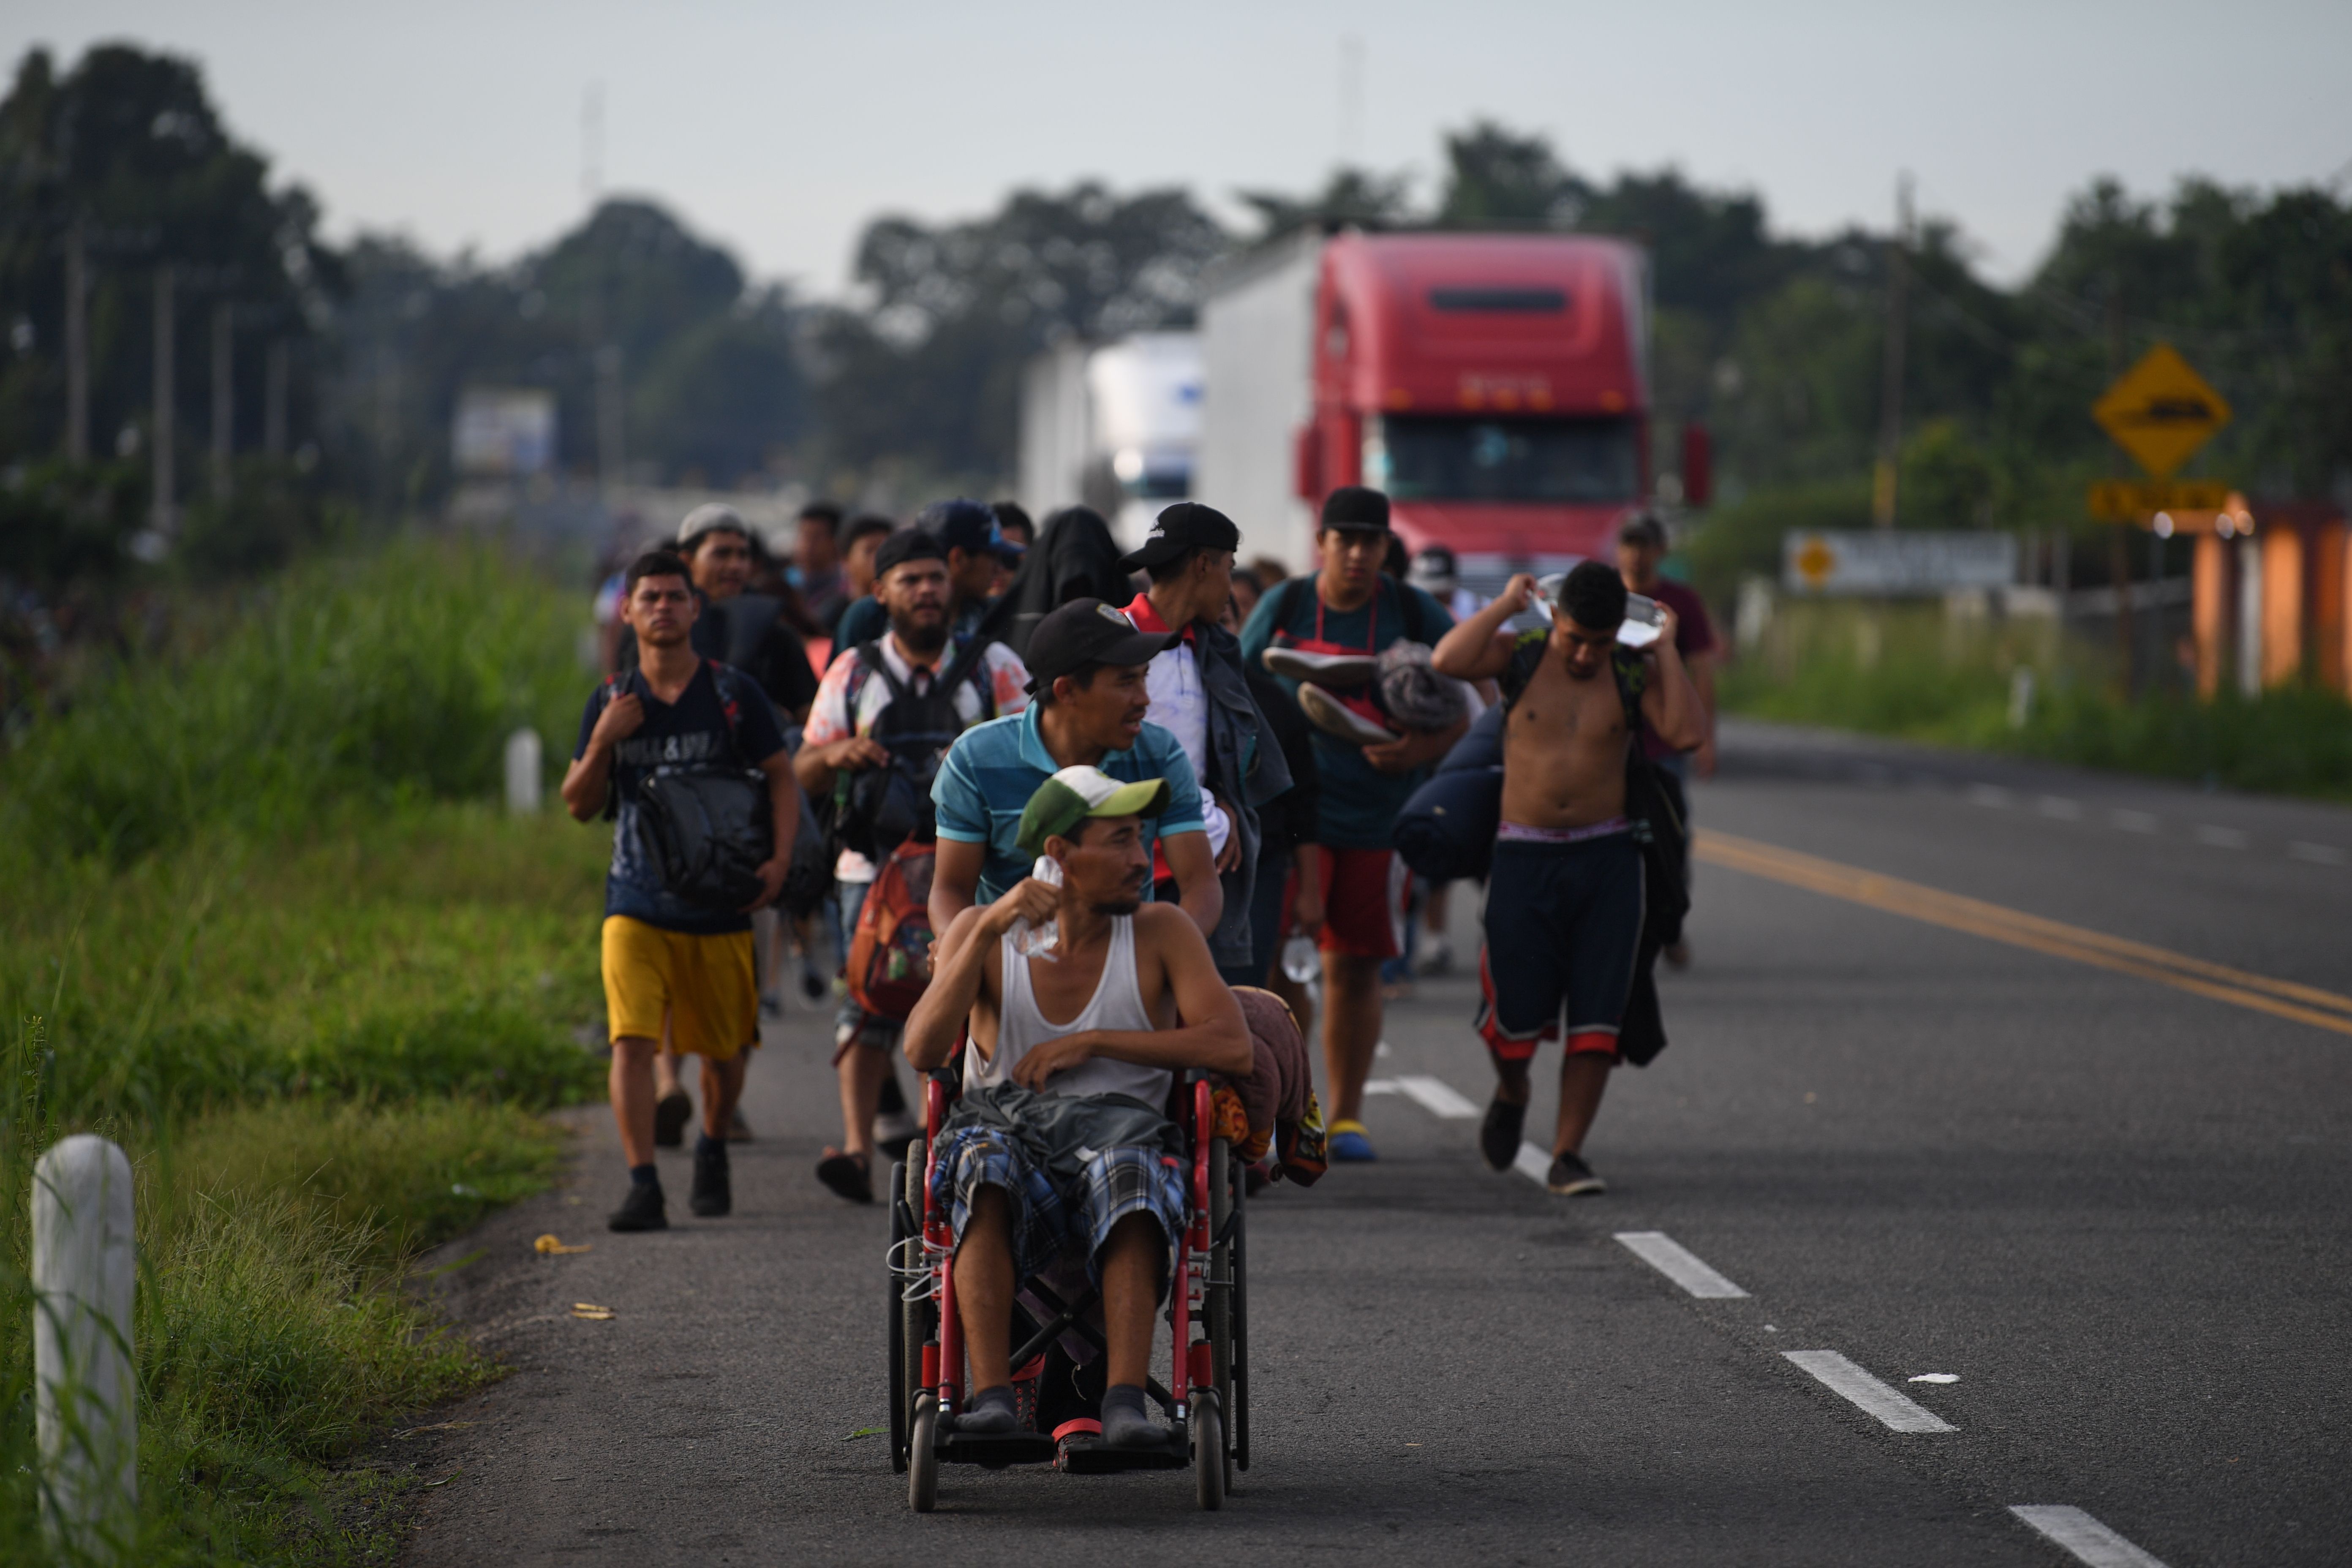 New Images Show Exactly How Massive The Migrant Caravan Is Traveling to The USA ...5568 x 3712